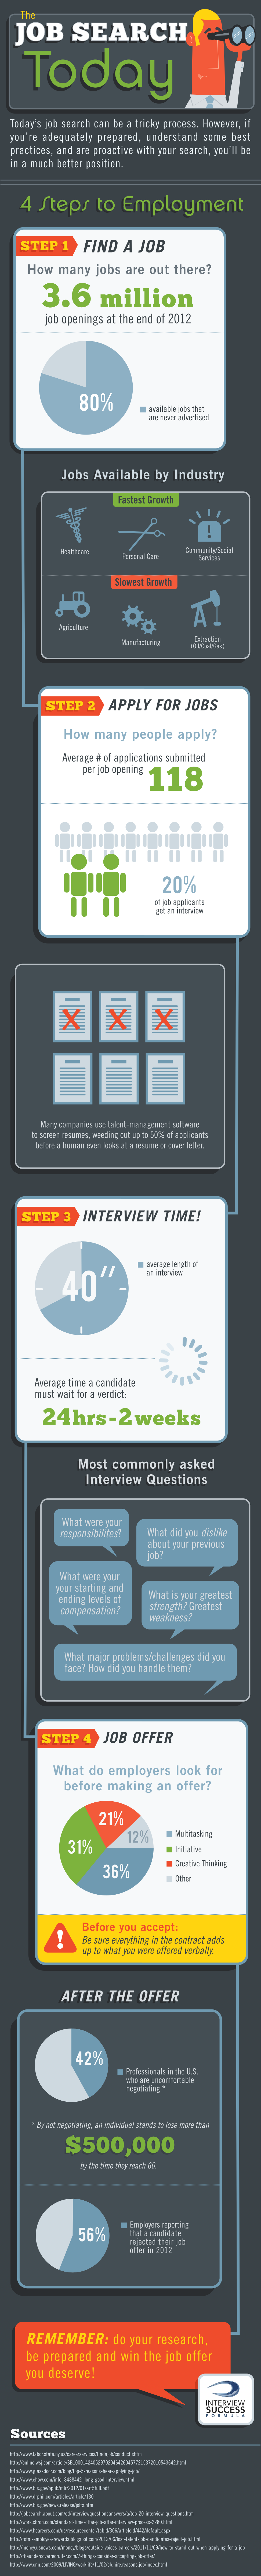 Succeeding in the Job Search Today [INFOGRAPHIC]